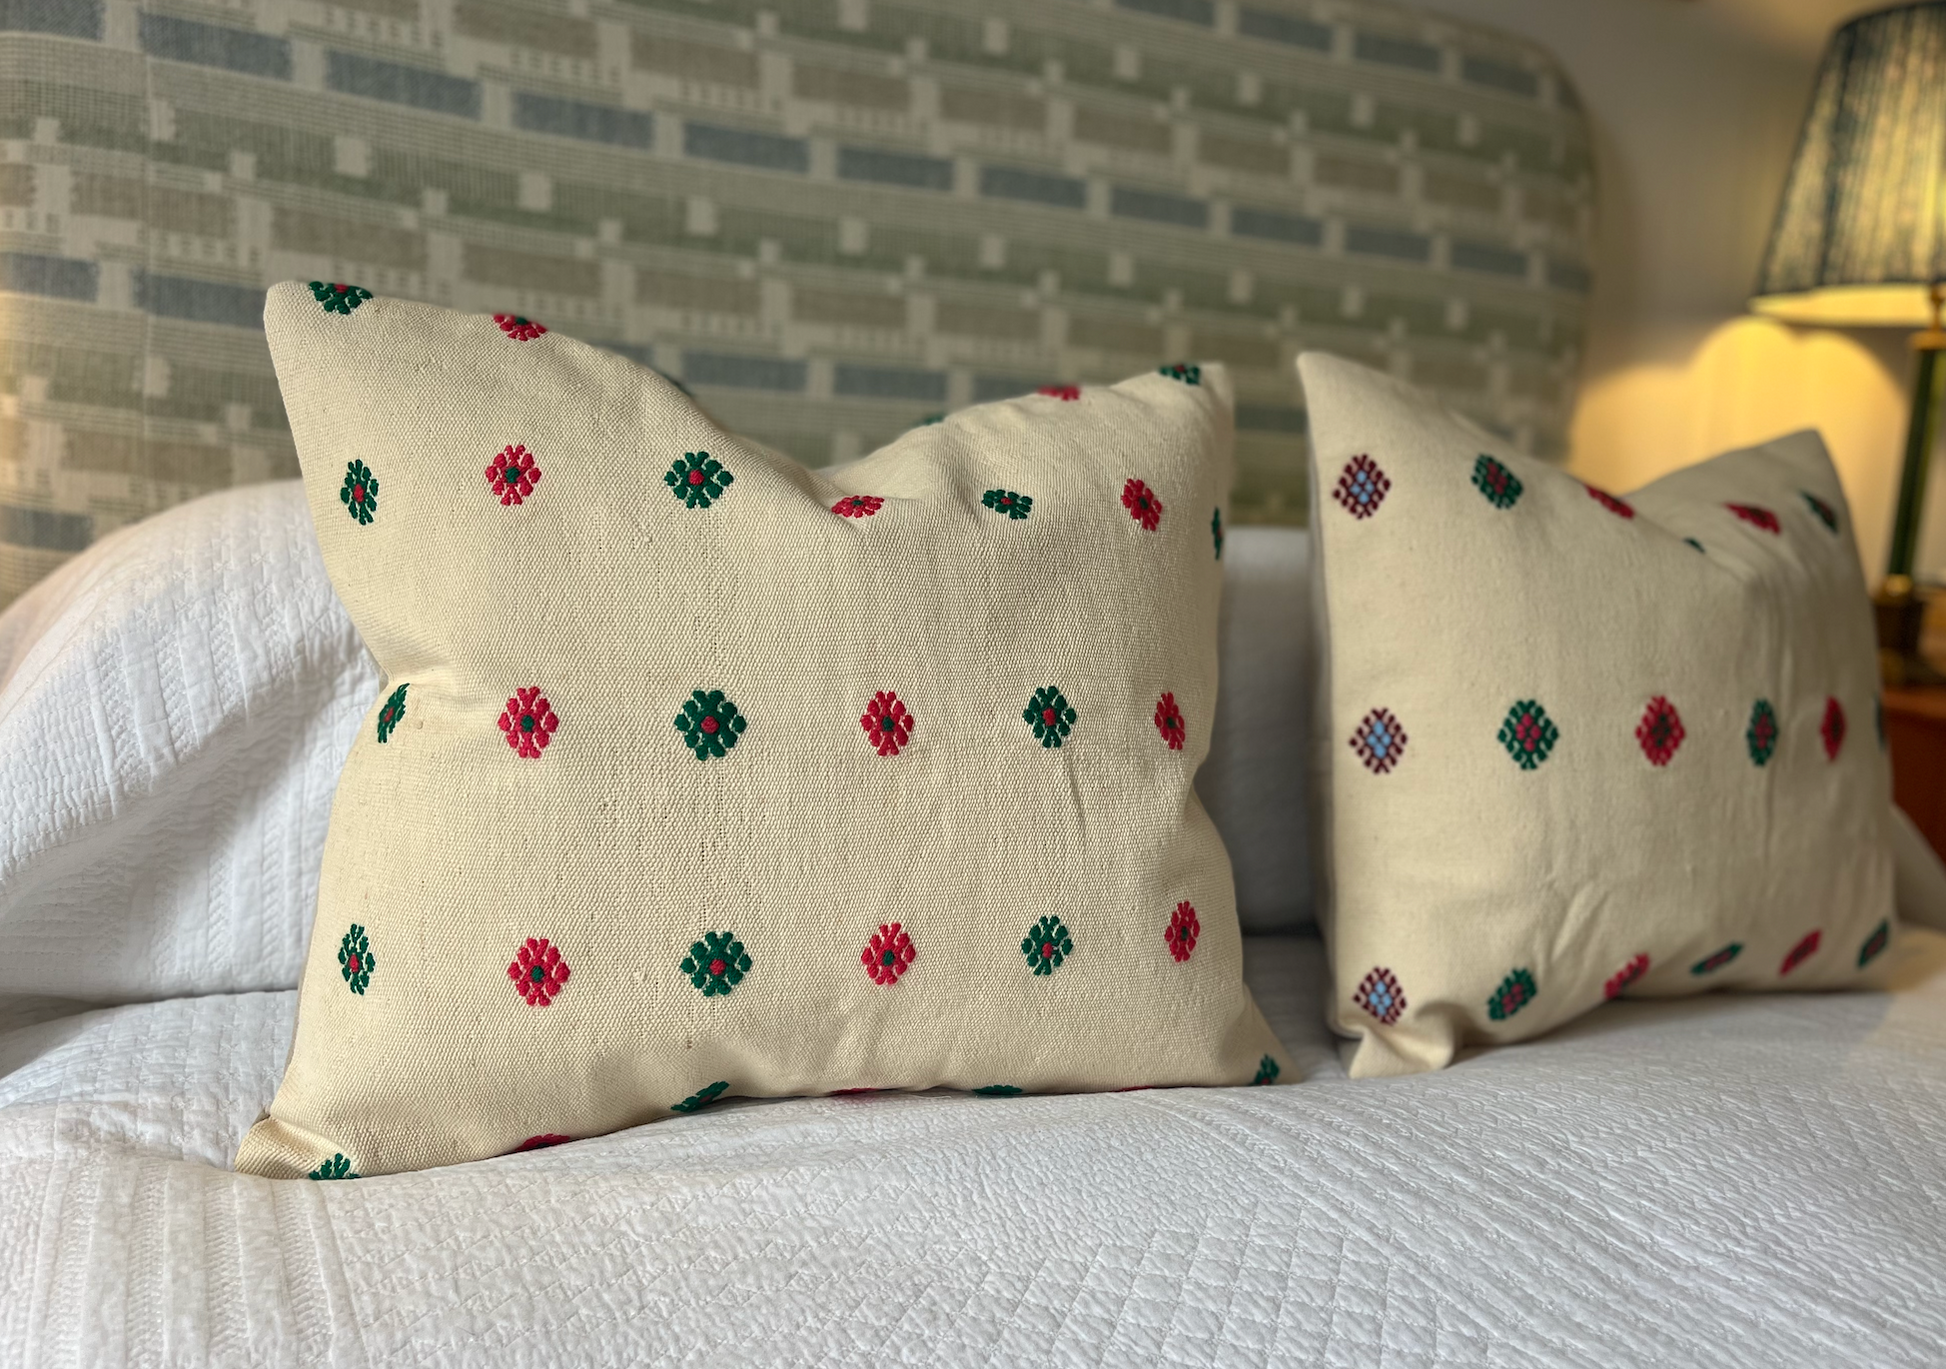 Stunning and Unique Pink & Green Daisy Large Kilim Cushion